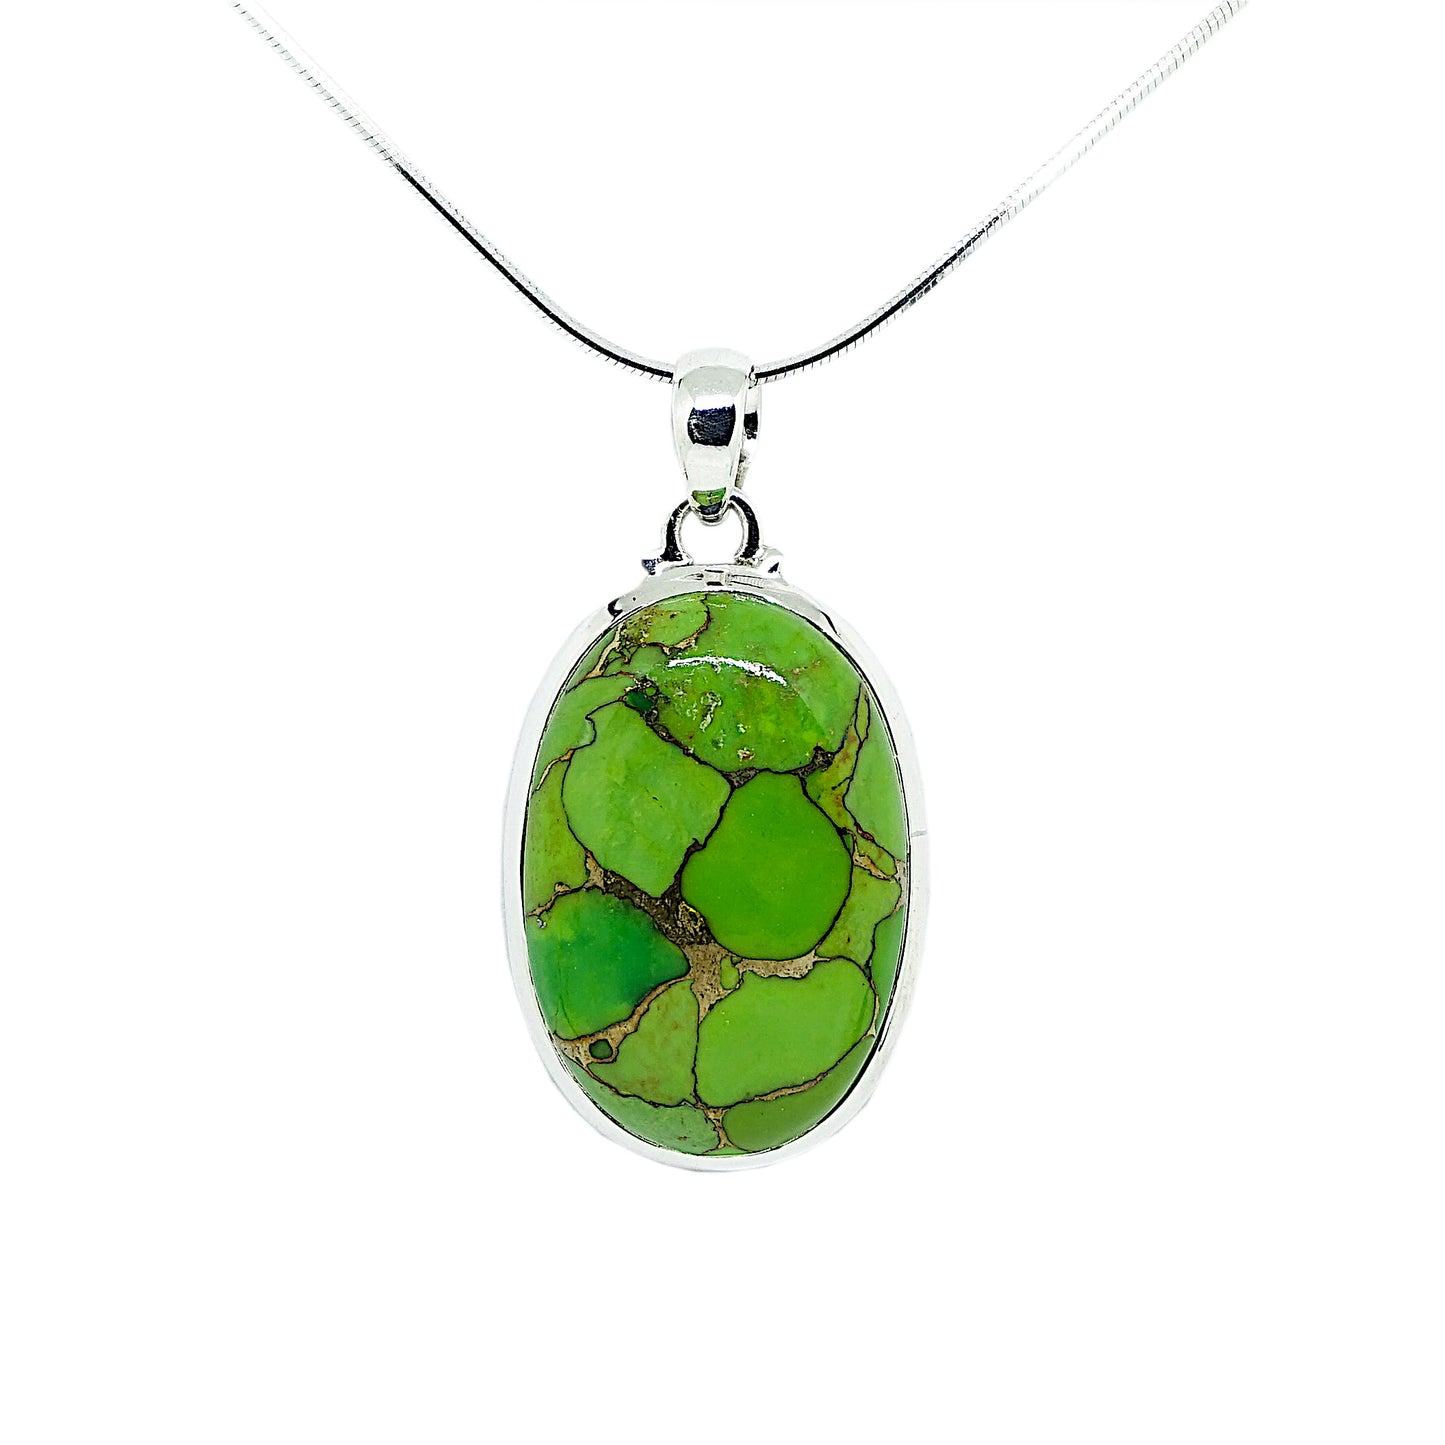 Green Turquoise Sterling Silver Oval Pendant on Silver Chain